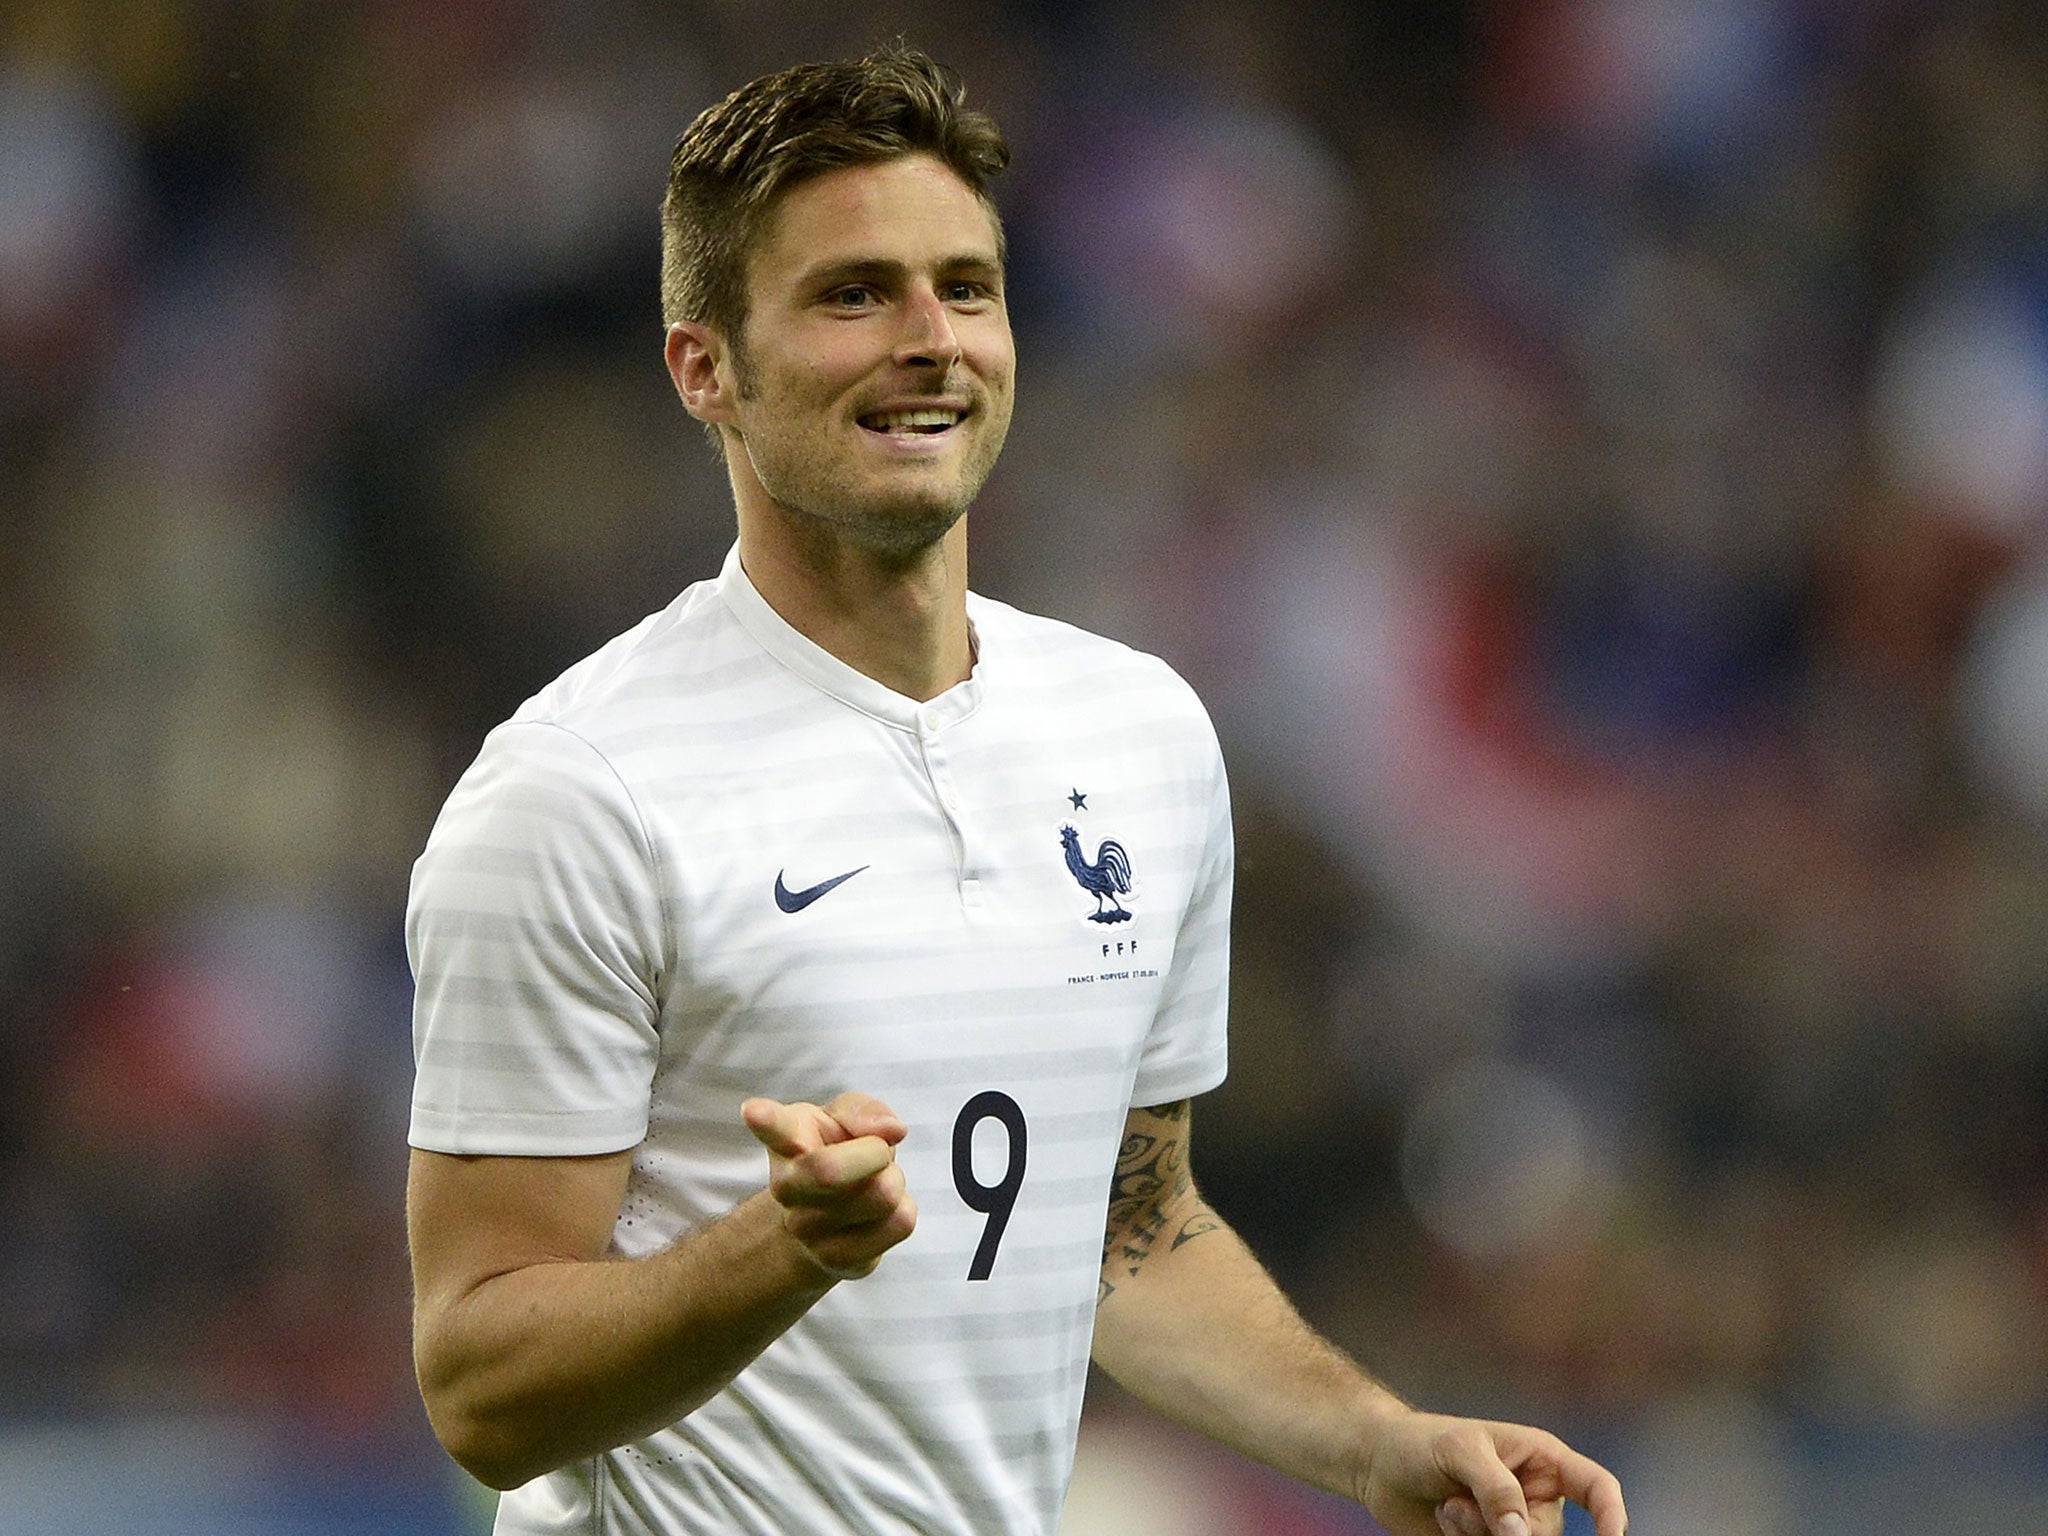 France's forward Olivier Giroud gestures as he celebrates his first goal against Norway